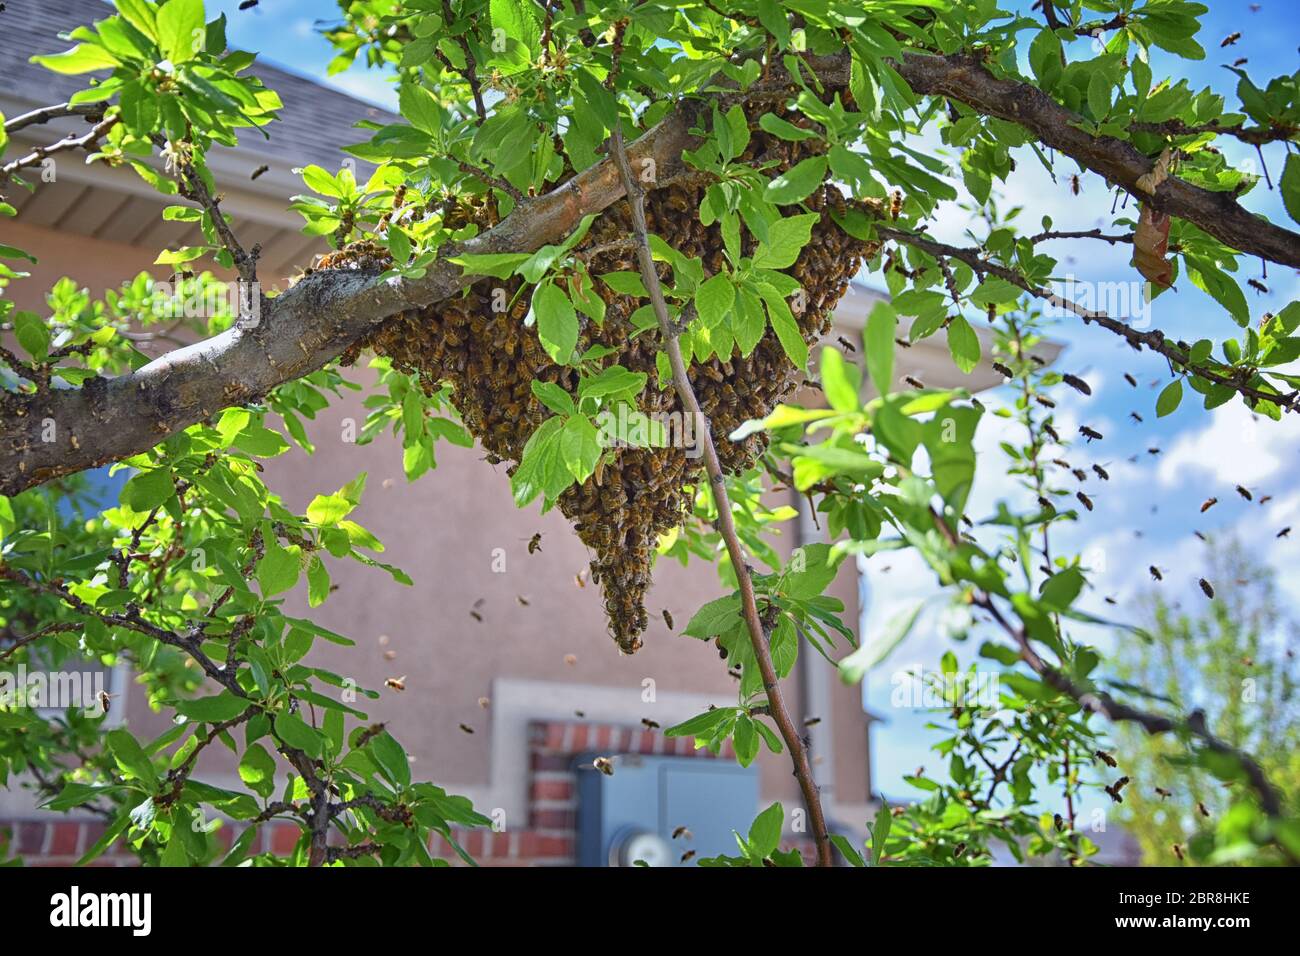 Swarm of Honey Bees, a eusocial flying insect within the genus Apis mellifera of the bee clade. Swarming Carniolan Italian honeybee on a plum tree bra Stock Photo